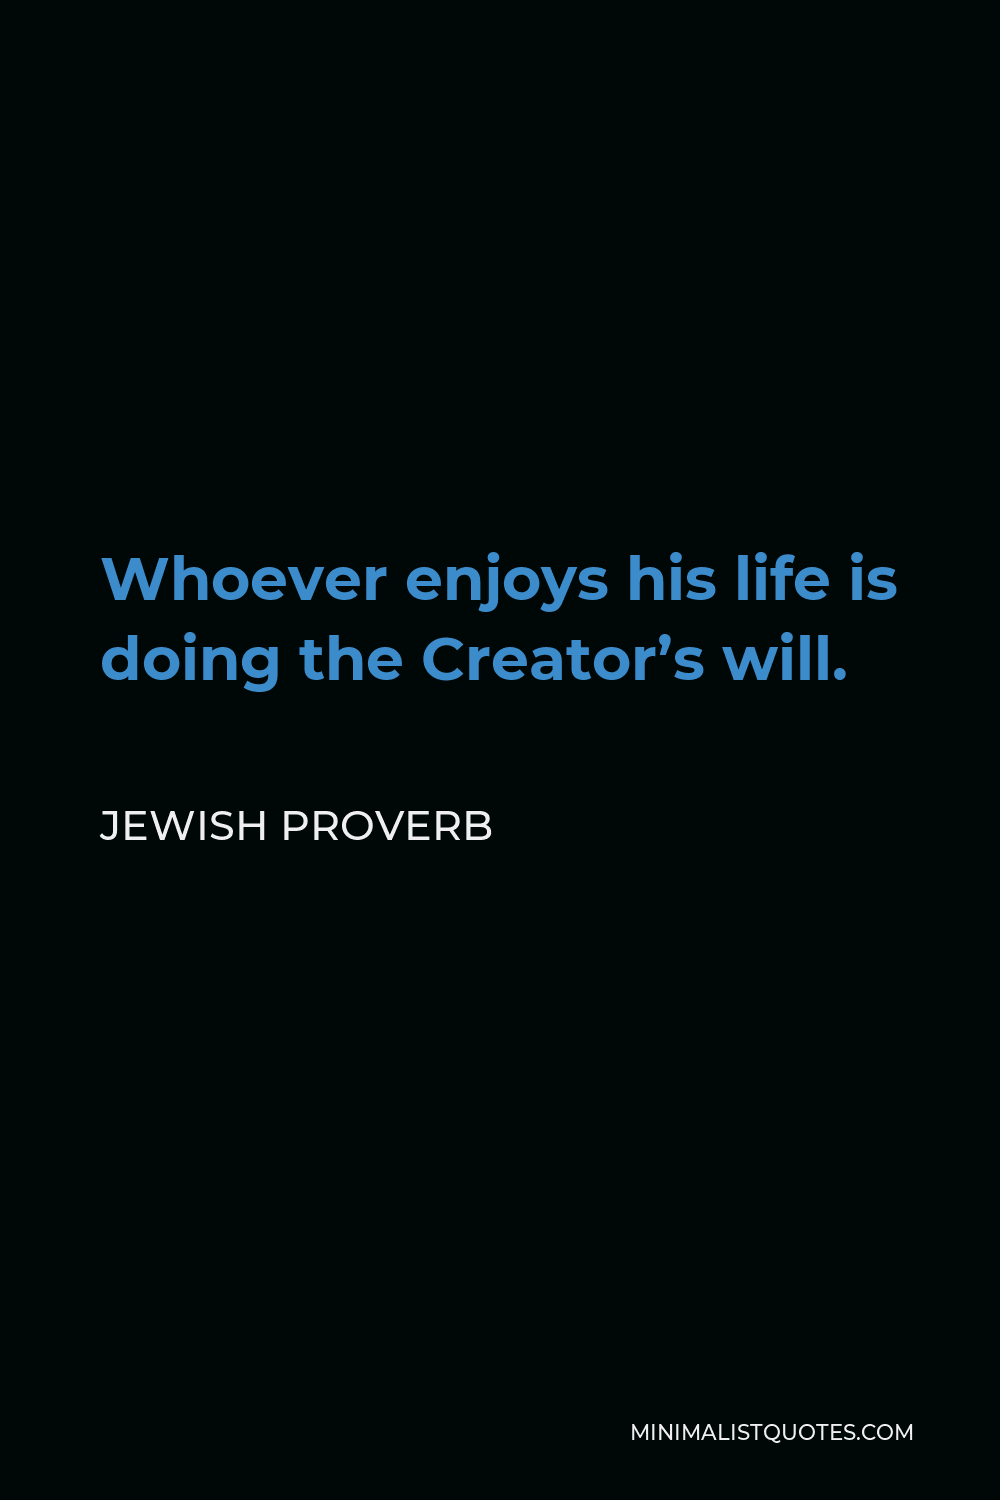 Jewish Proverb Quote - Whoever enjoys his life is doing the Creator’s will.